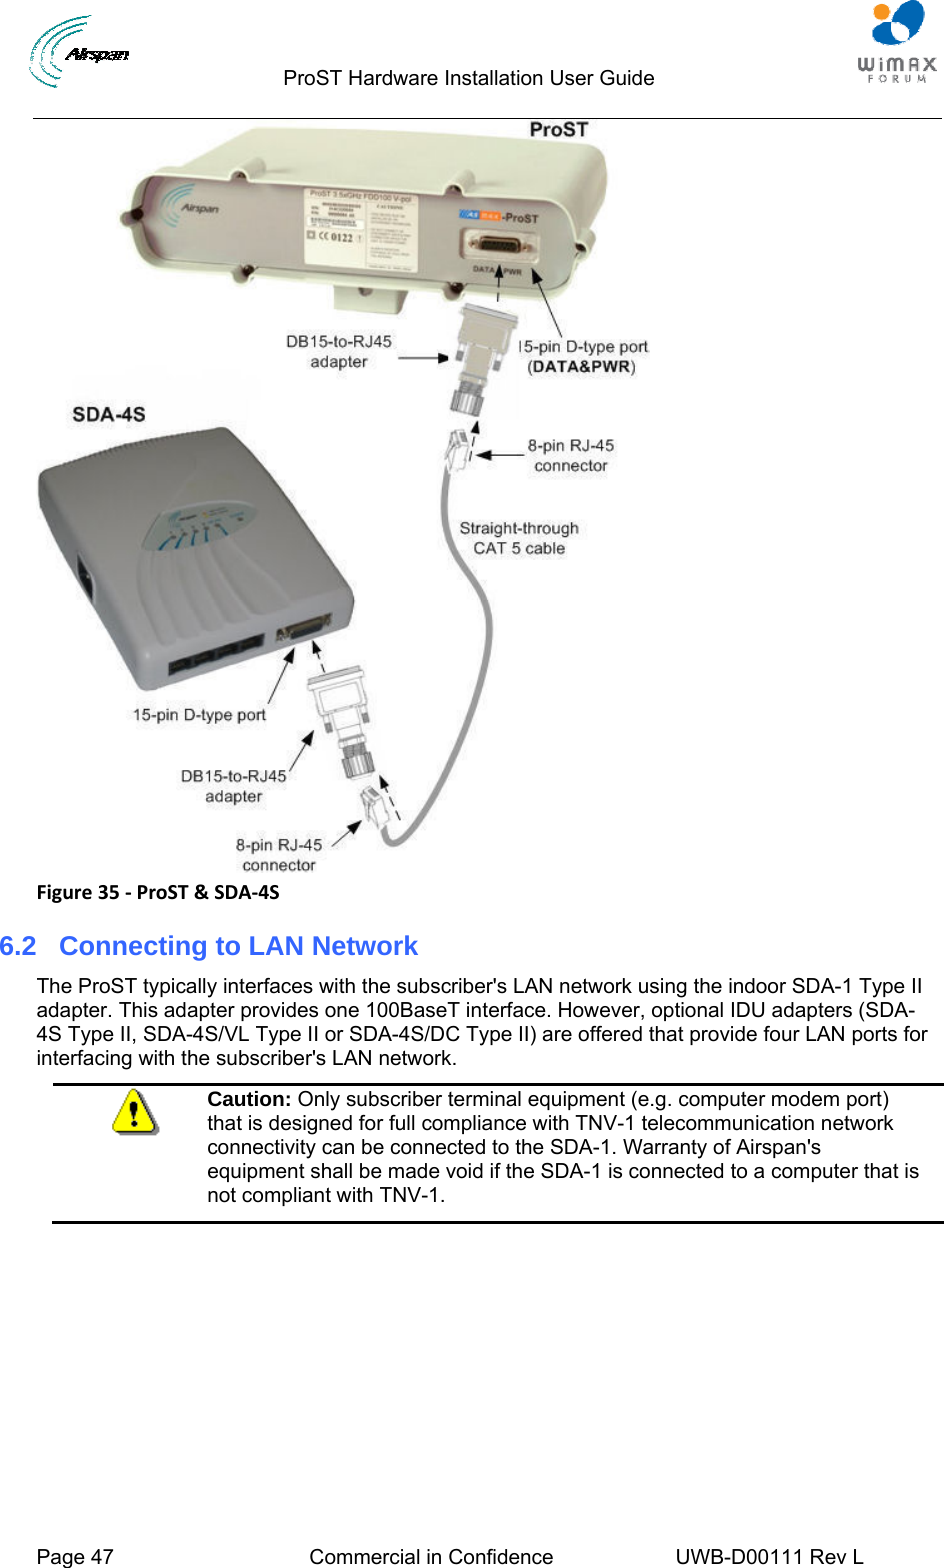                                  ProST Hardware Installation User Guide  Page 47  Commercial in Confidence  UWB-D00111 Rev L    Figure35‐ProST&amp;SDA‐4S6.2  Connecting to LAN Network The ProST typically interfaces with the subscriber&apos;s LAN network using the indoor SDA-1 Type II adapter. This adapter provides one 100BaseT interface. However, optional IDU adapters (SDA-4S Type II, SDA-4S/VL Type II or SDA-4S/DC Type II) are offered that provide four LAN ports for interfacing with the subscriber&apos;s LAN network.  Caution: Only subscriber terminal equipment (e.g. computer modem port) that is designed for full compliance with TNV-1 telecommunication network connectivity can be connected to the SDA-1. Warranty of Airspan&apos;s equipment shall be made void if the SDA-1 is connected to a computer that is not compliant with TNV-1.  